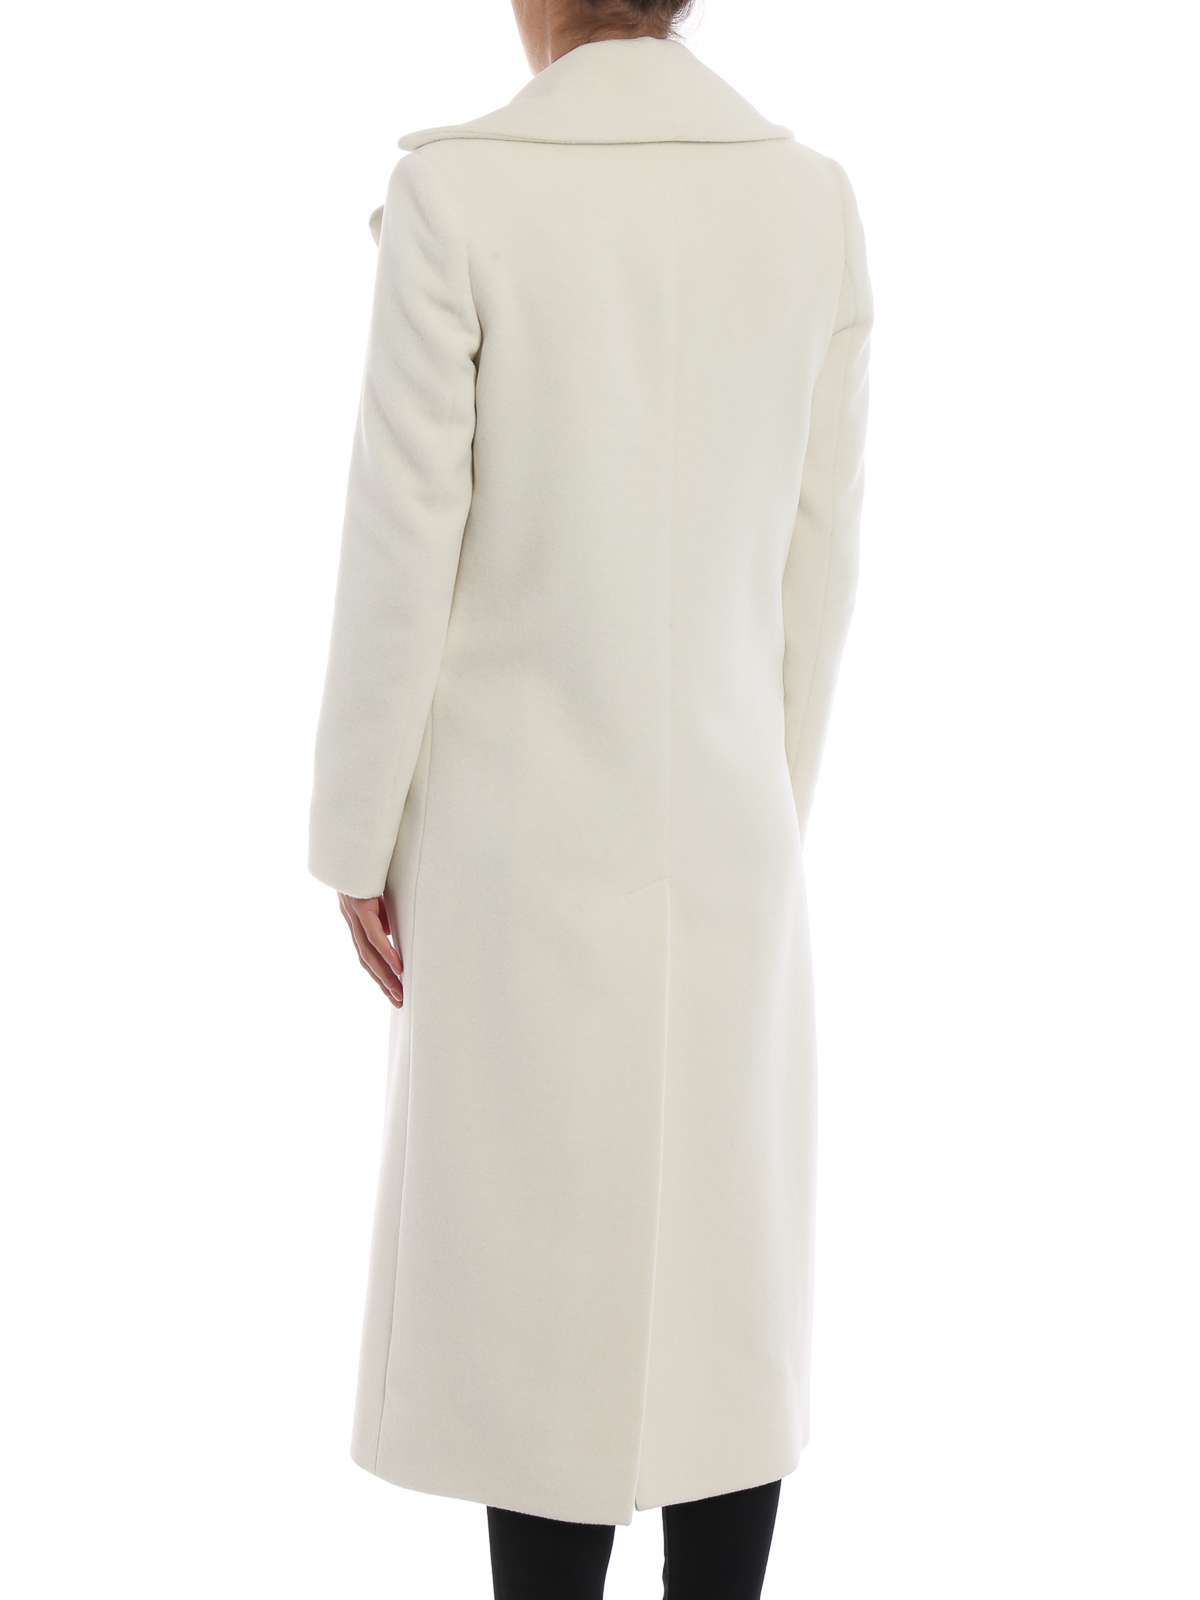 Womens Clothing Coats Long coats and winter coats Tagliatore 0205 Synthetic Overcoat in White 